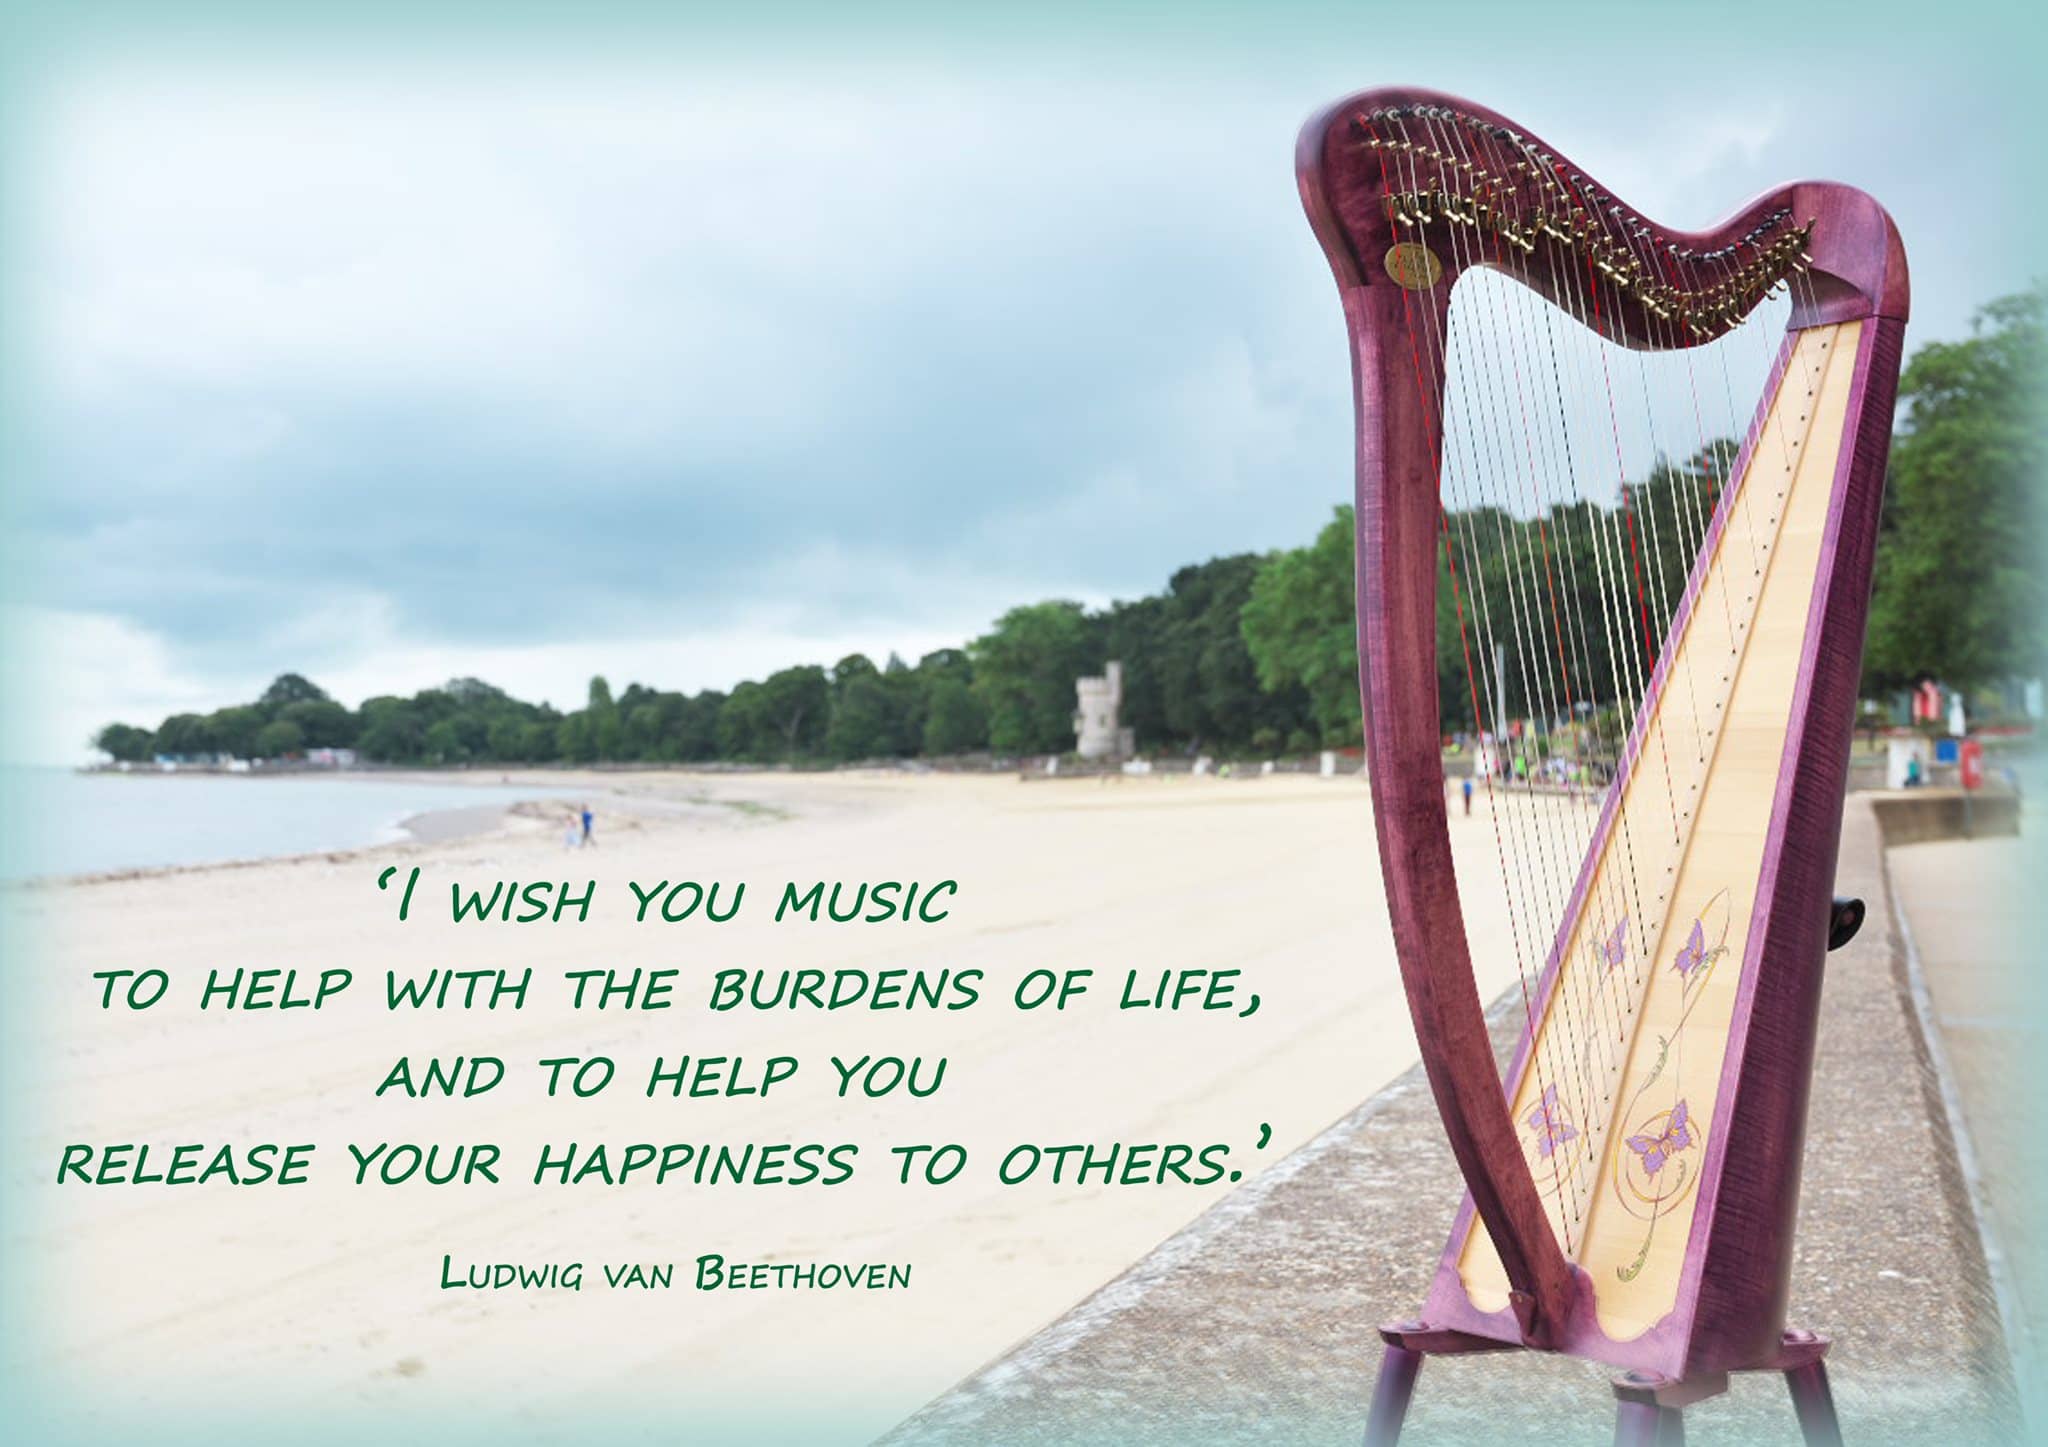 harp on wight promo - harp on the beach with quote from Beethoven